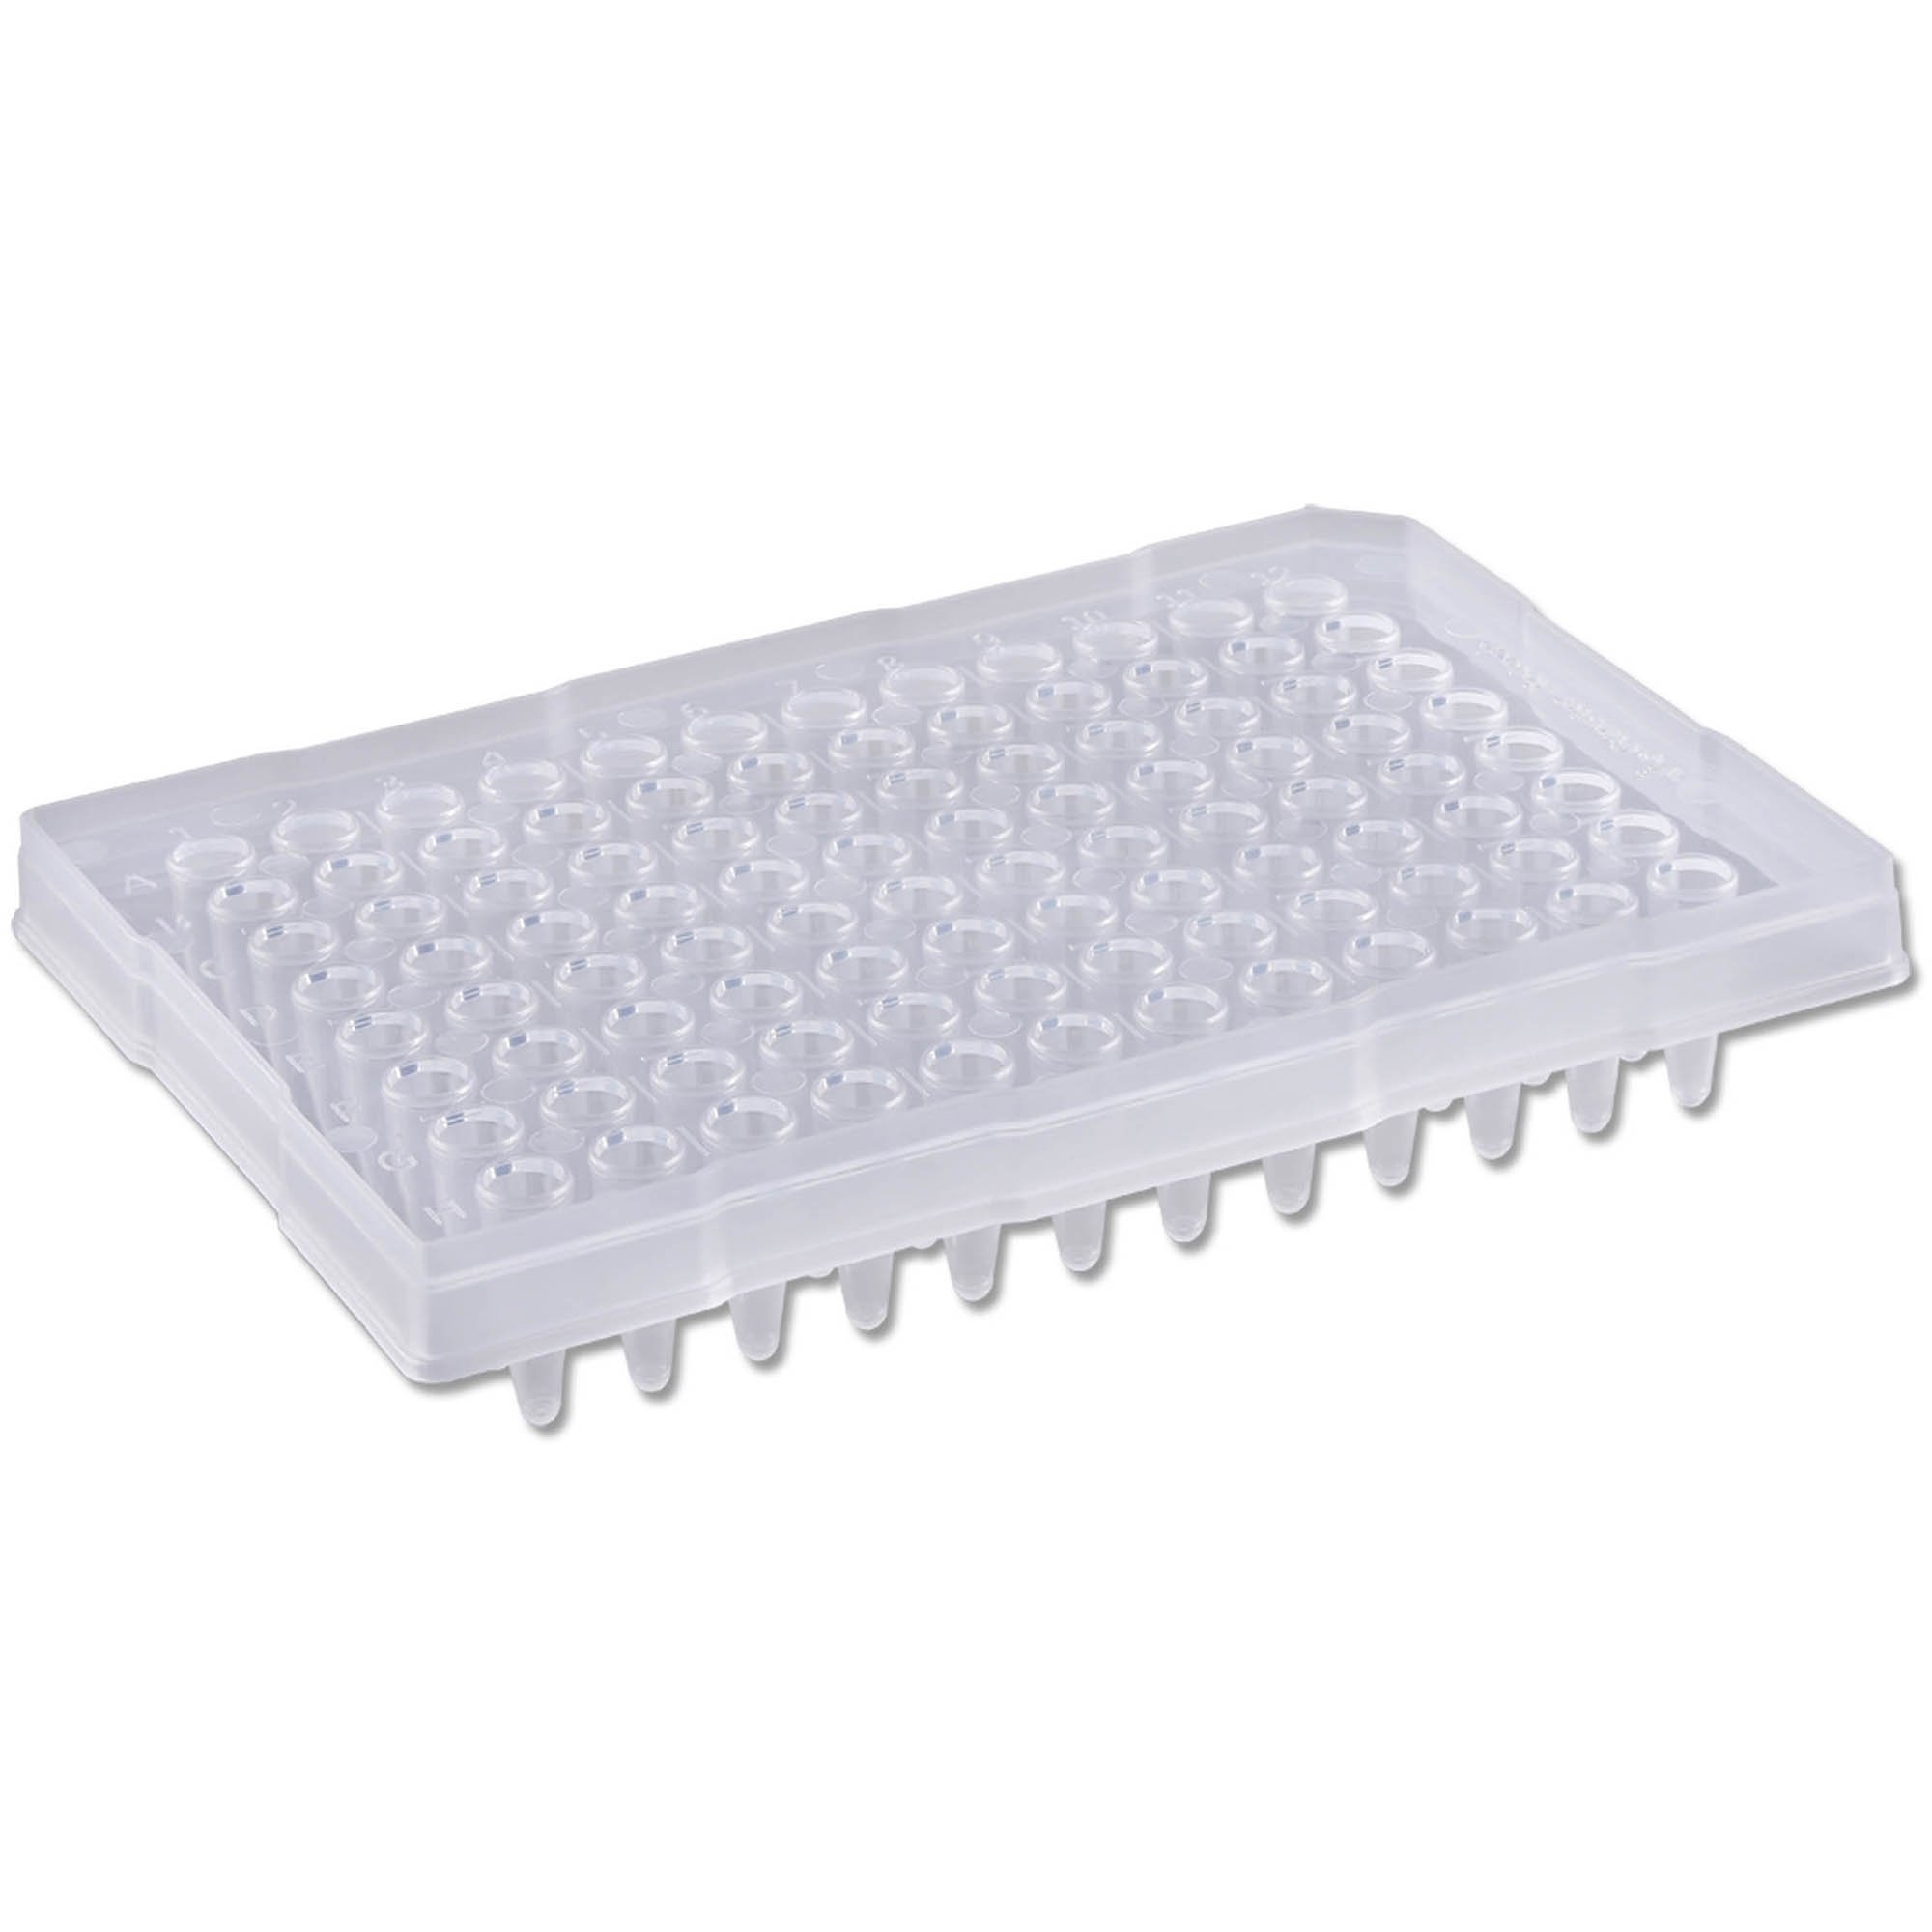 PureAmp 96-Well x 0.2mL PCR Plates - Semi Skirted with Raised Rim, Natural (10 Packs of 50 per Pack)